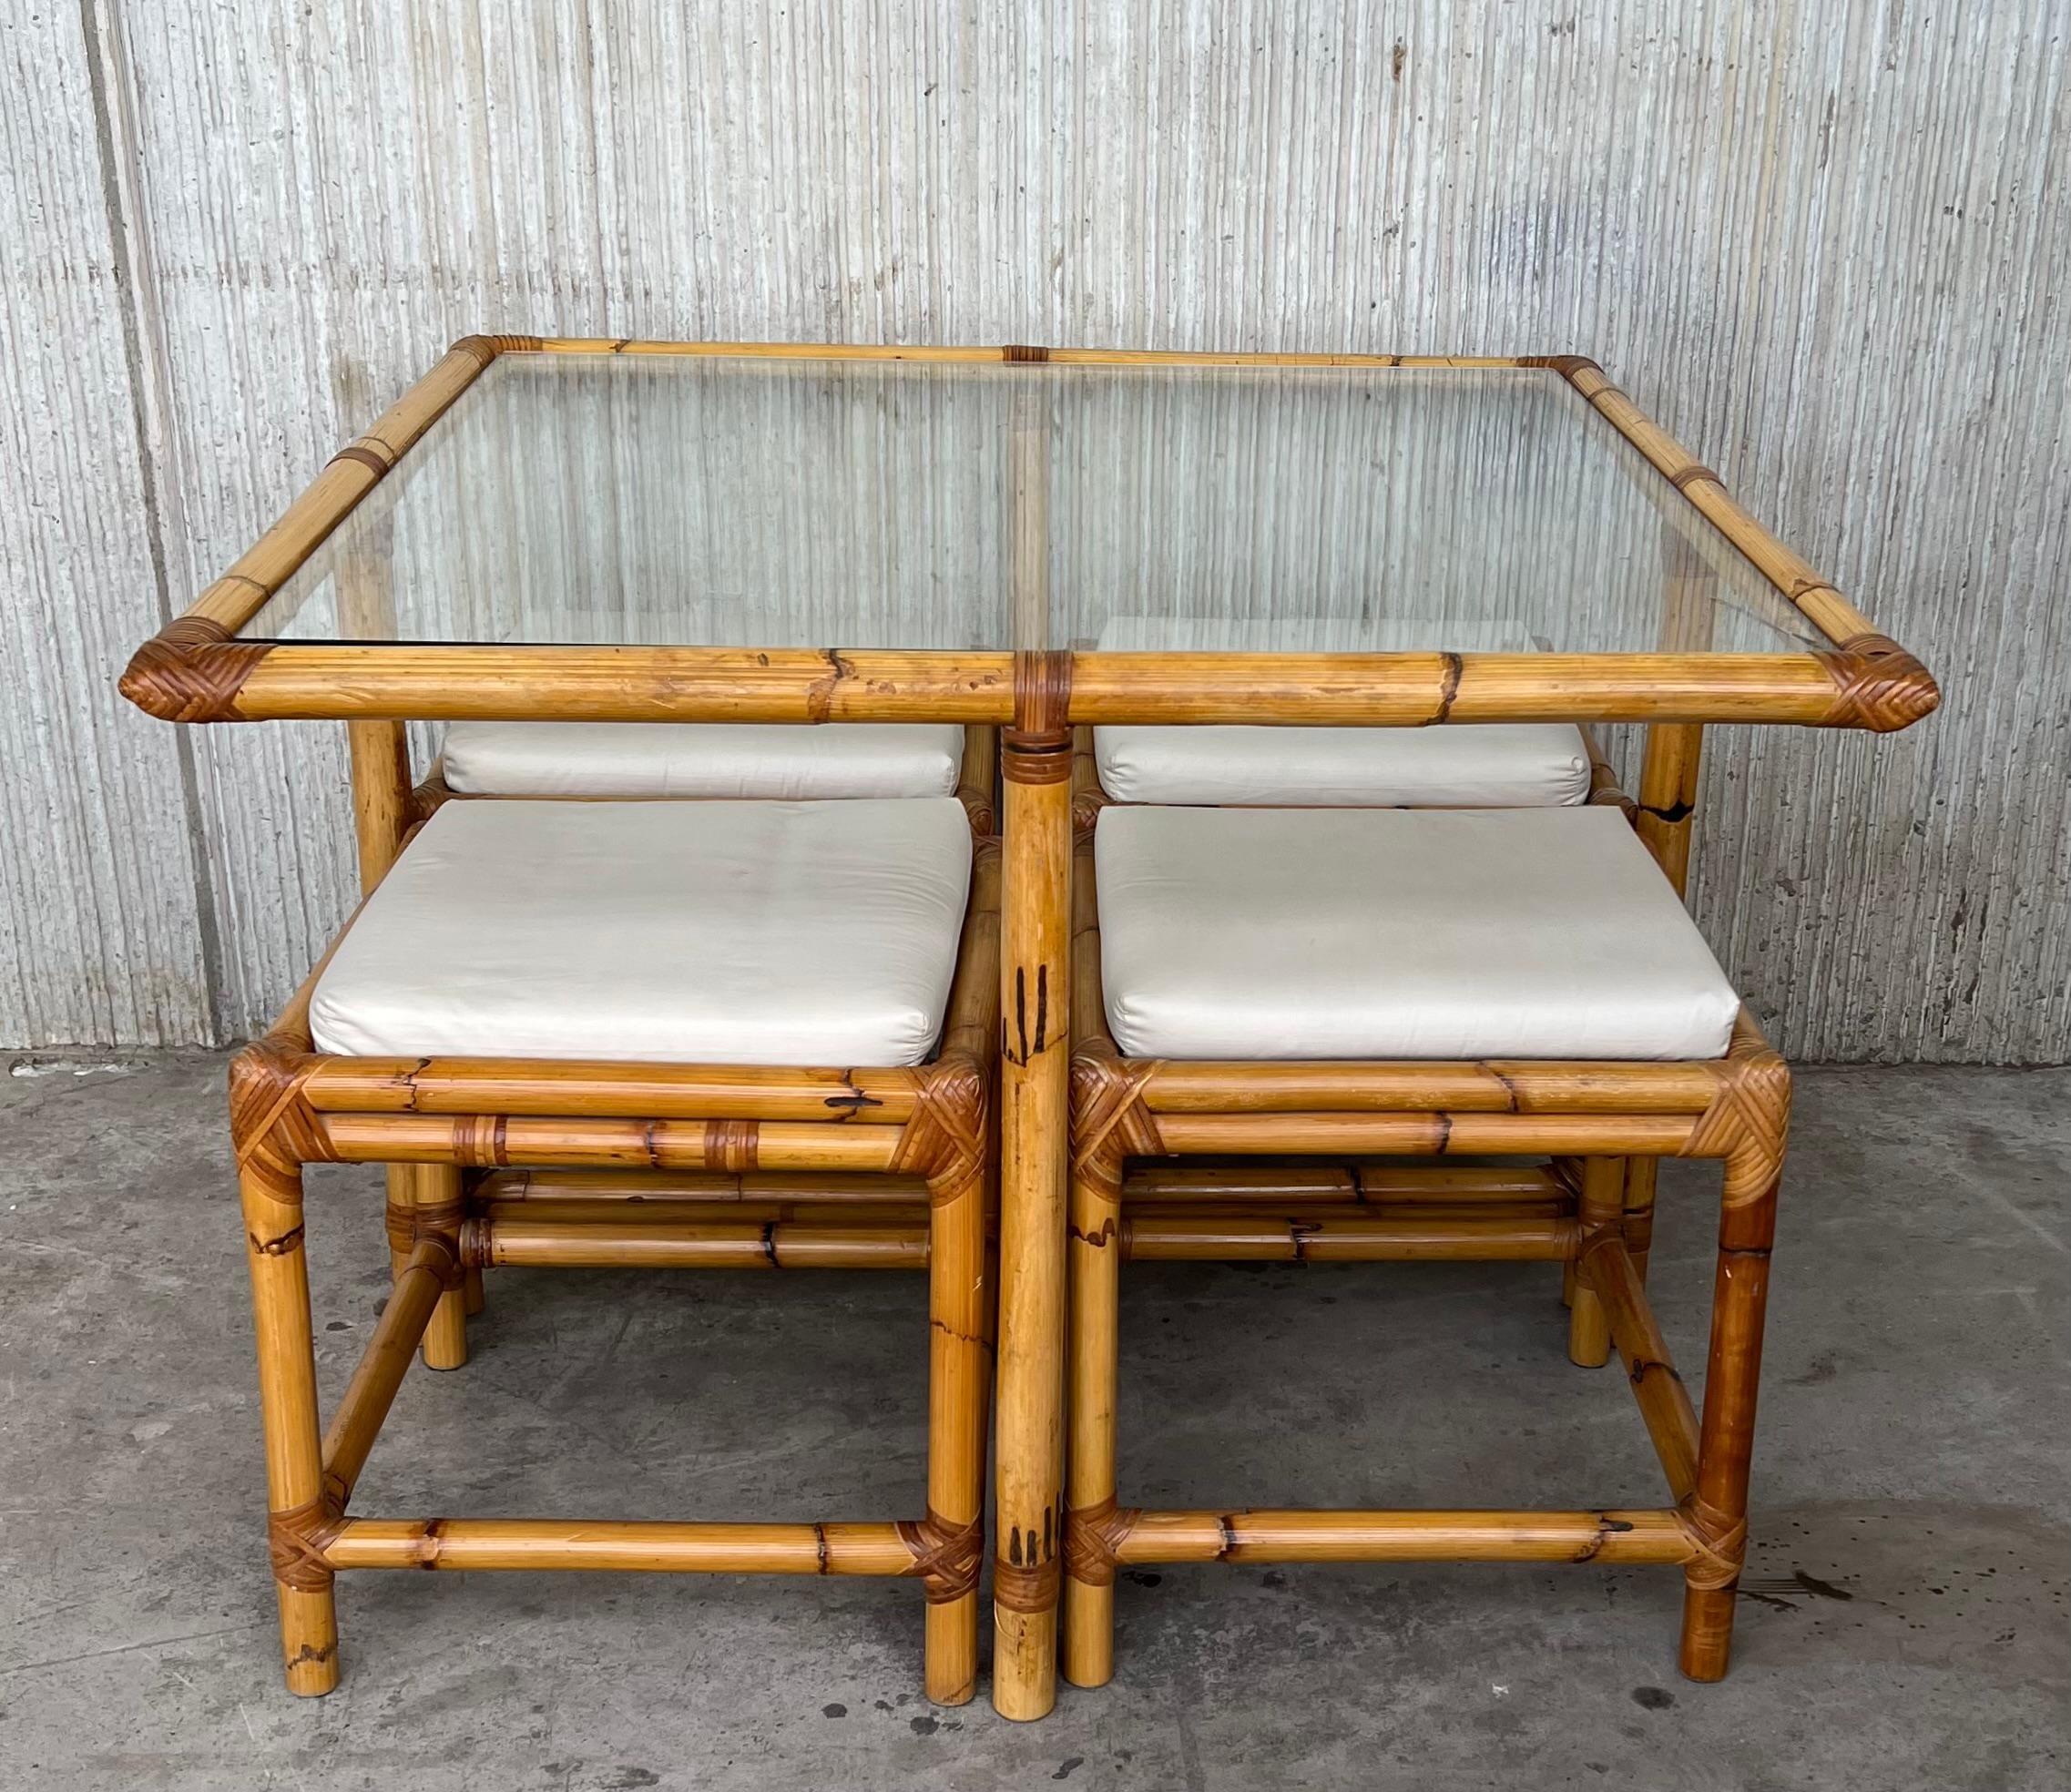 Vintage square McGuire style bamboo and glass dining table with four stools.

Each stool is 15.75 x 15.75 in.
 